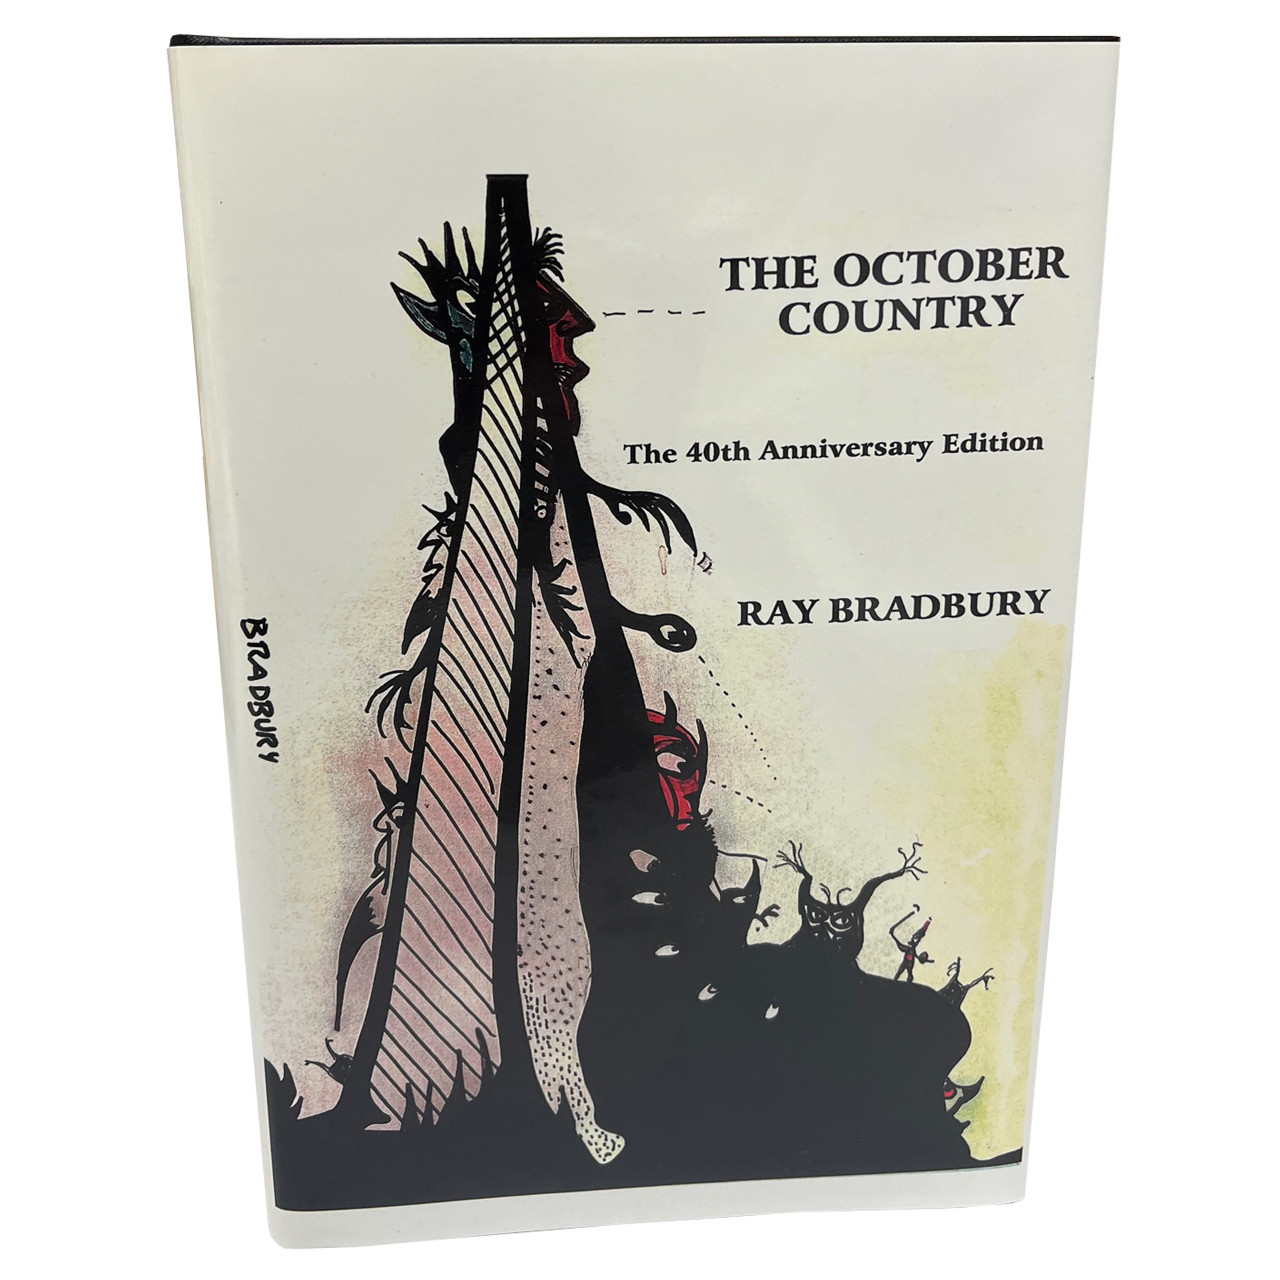 Ray Bradbury "The October Country: The 40th Anniversary Edition" Slipcased Signed Limited Edition, No. 205 of 500